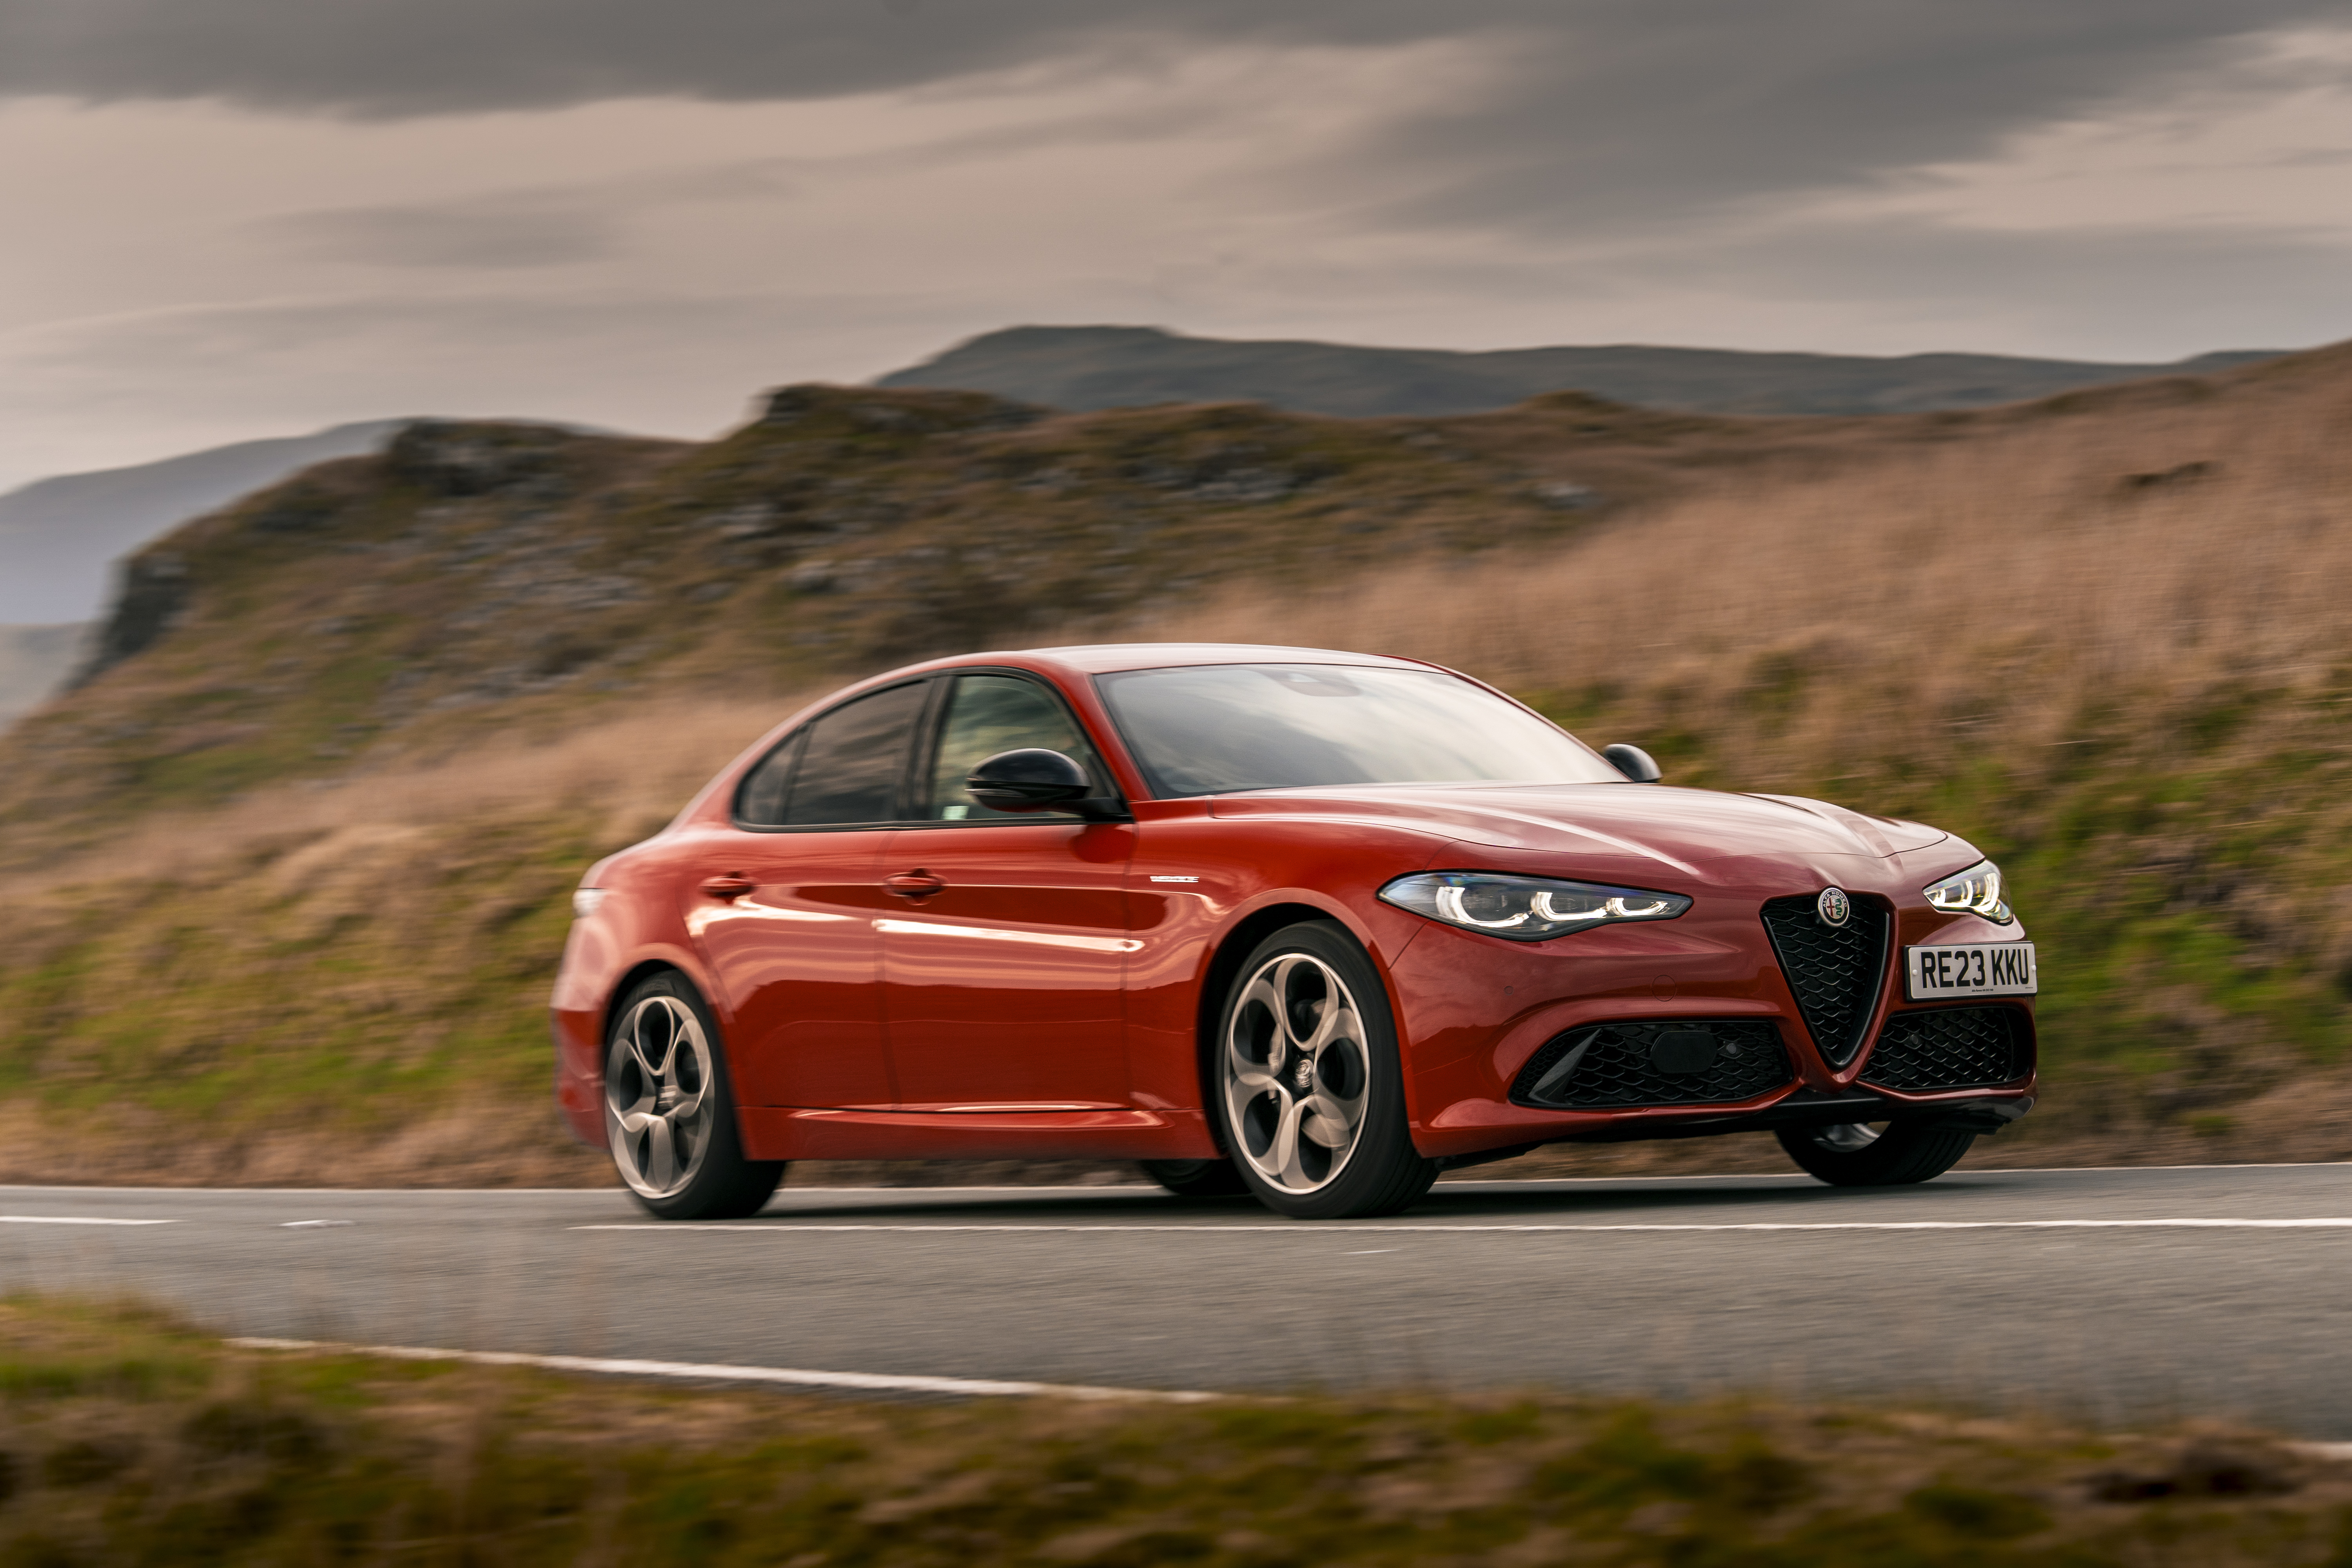 Top Gear's Top 9: the greatest Alfa Romeos of all time